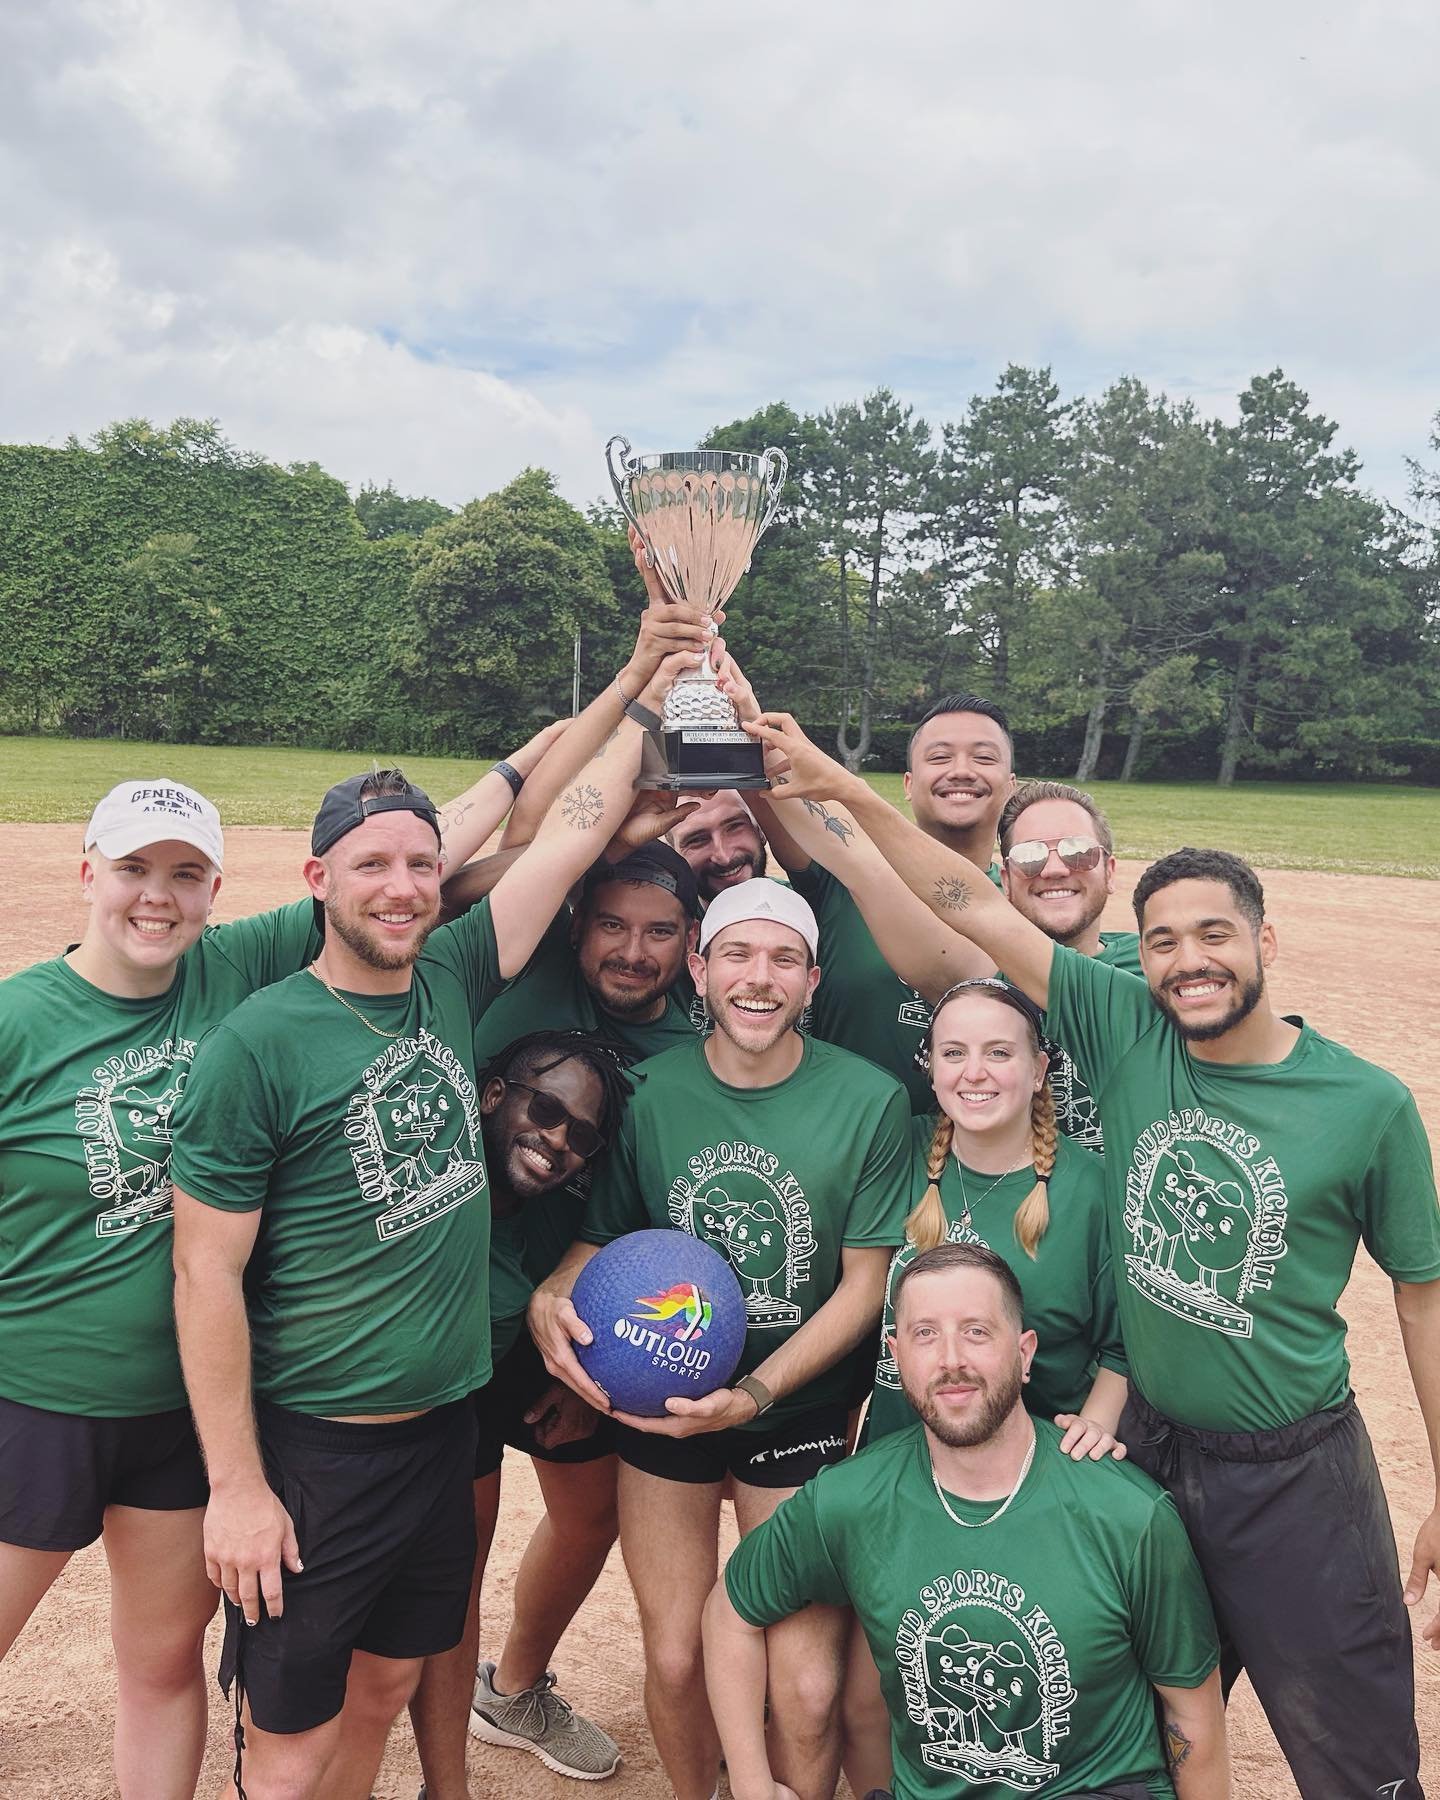 Congrats to our Spring Season Champions - Mixed Cardio! 

Playoffs brought out a fun and competitive spirit in all our teams, followed by excellent food / drinks at our sponsor bar, @tavosroc! 

See y&rsquo;all in August 🫡

#outloudsports #gayathlet